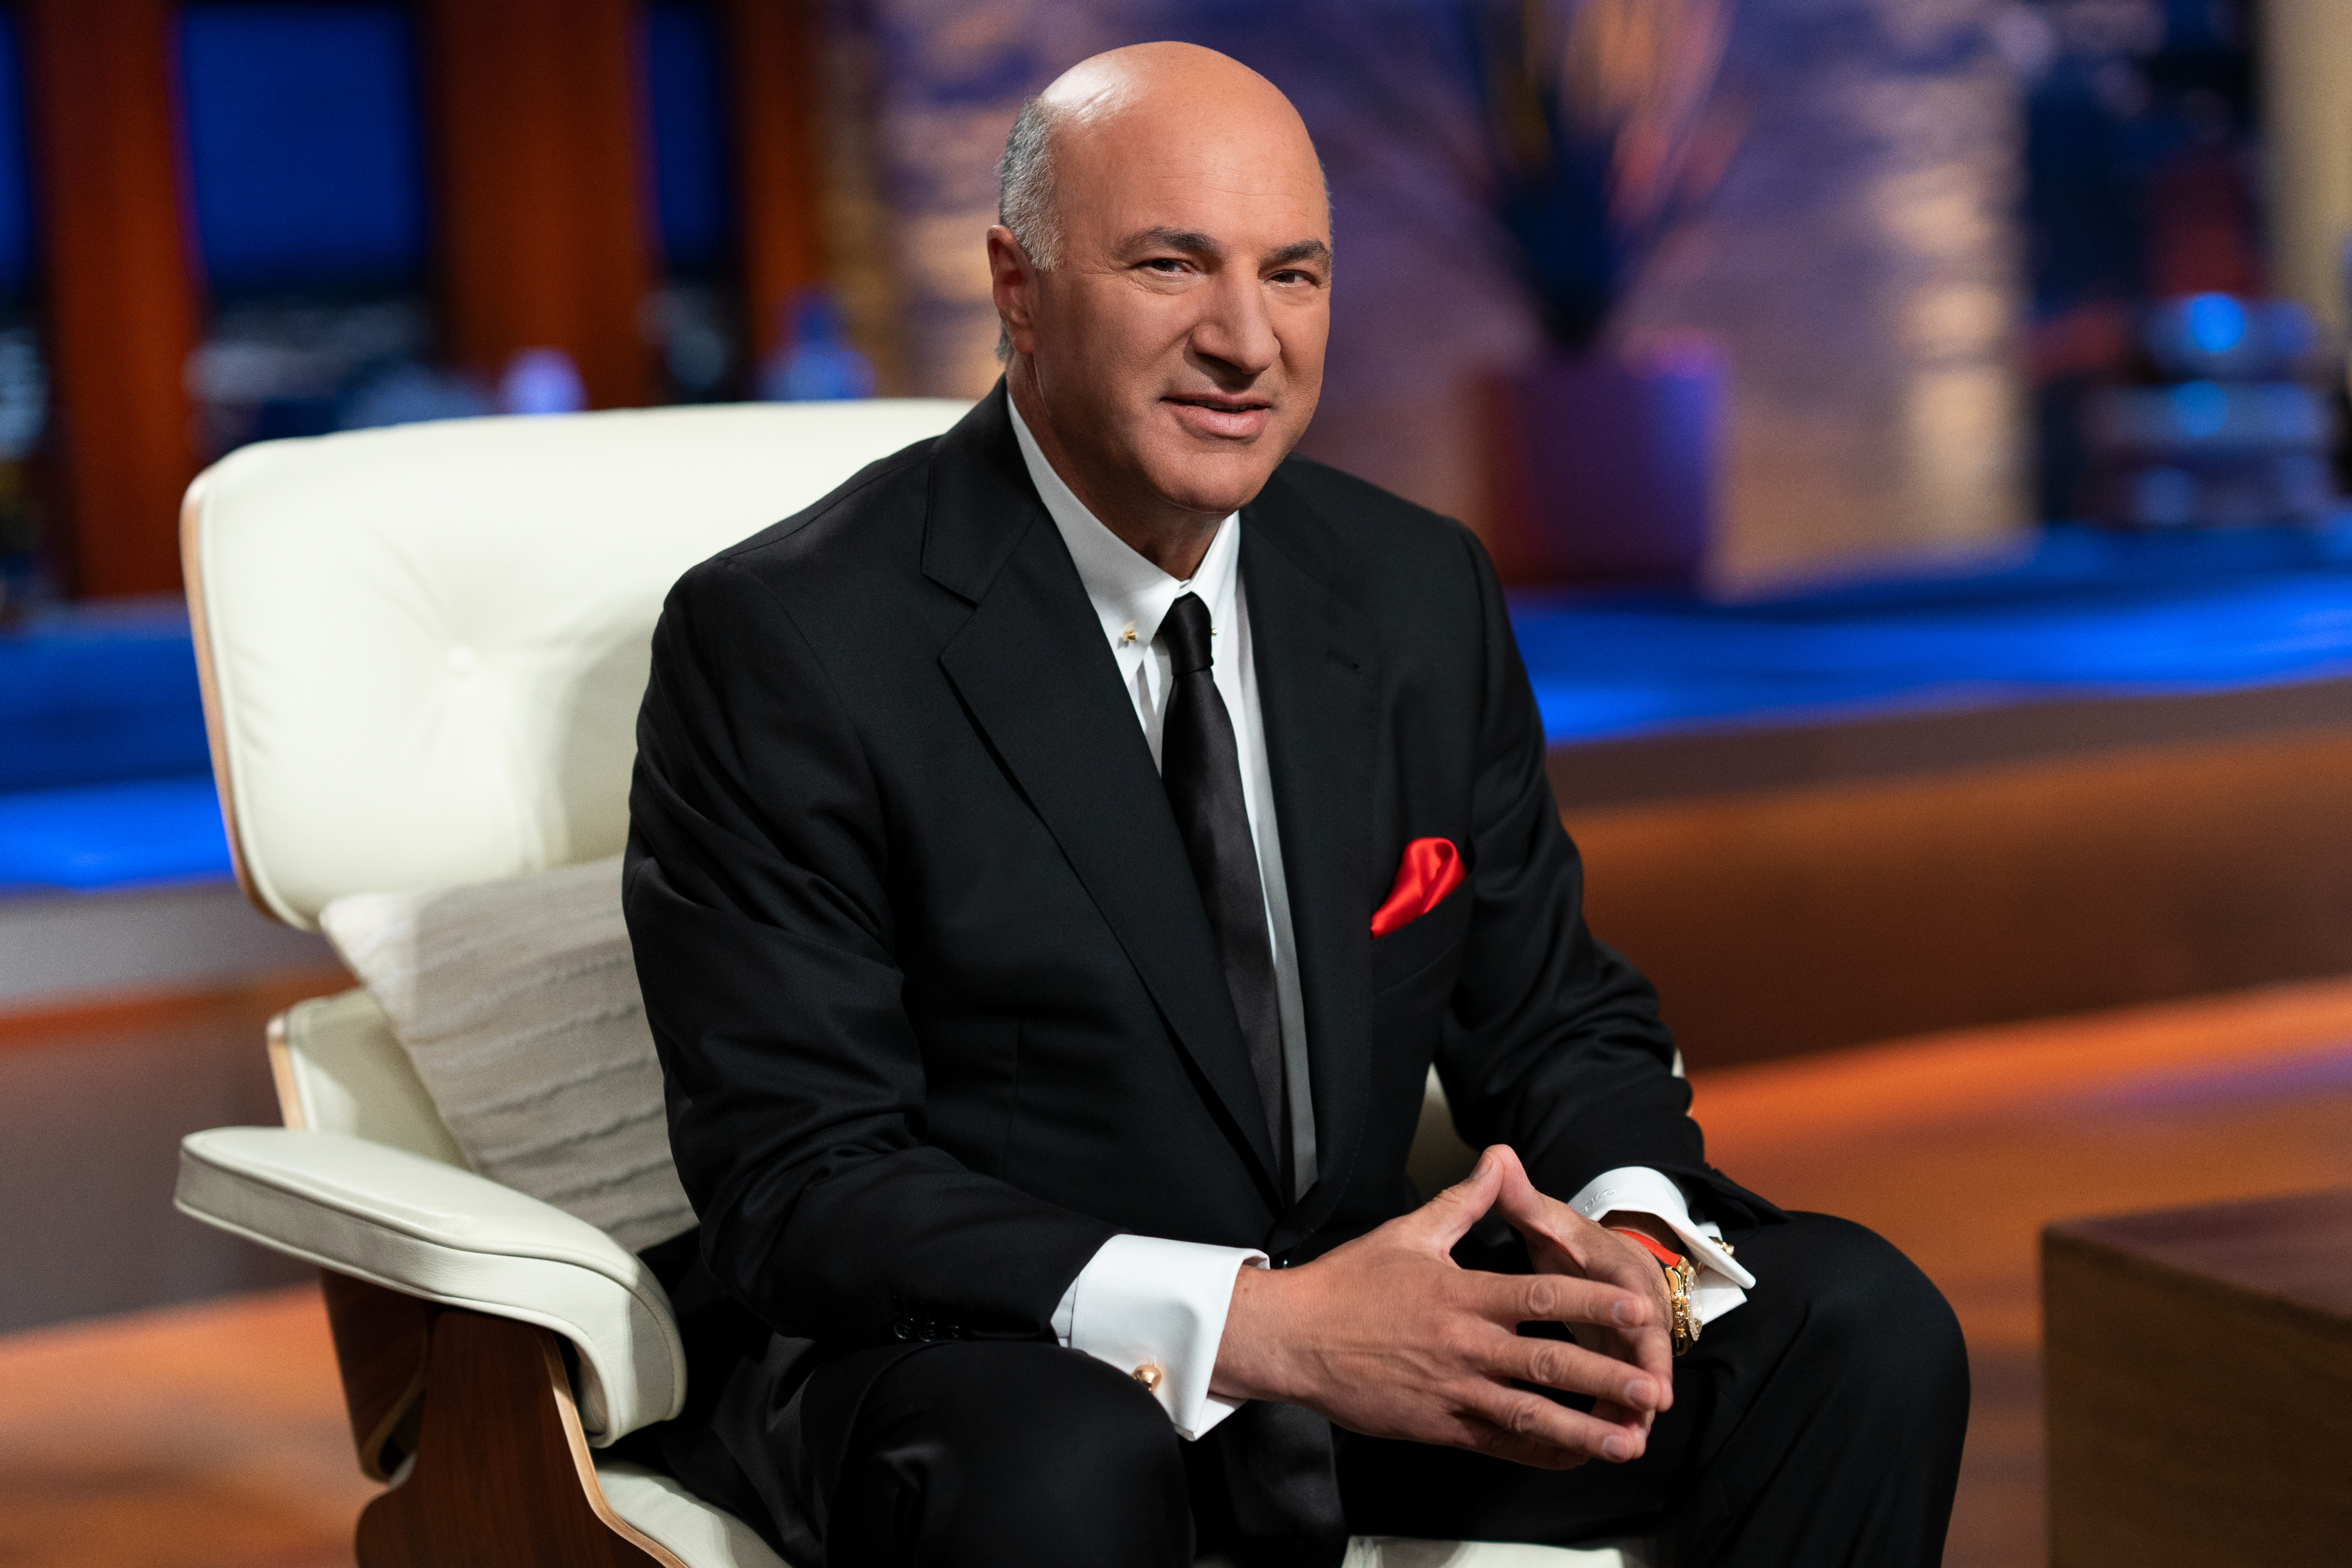 Kevin O'Leary has a definition of success you may not like, but his  priorities are clear